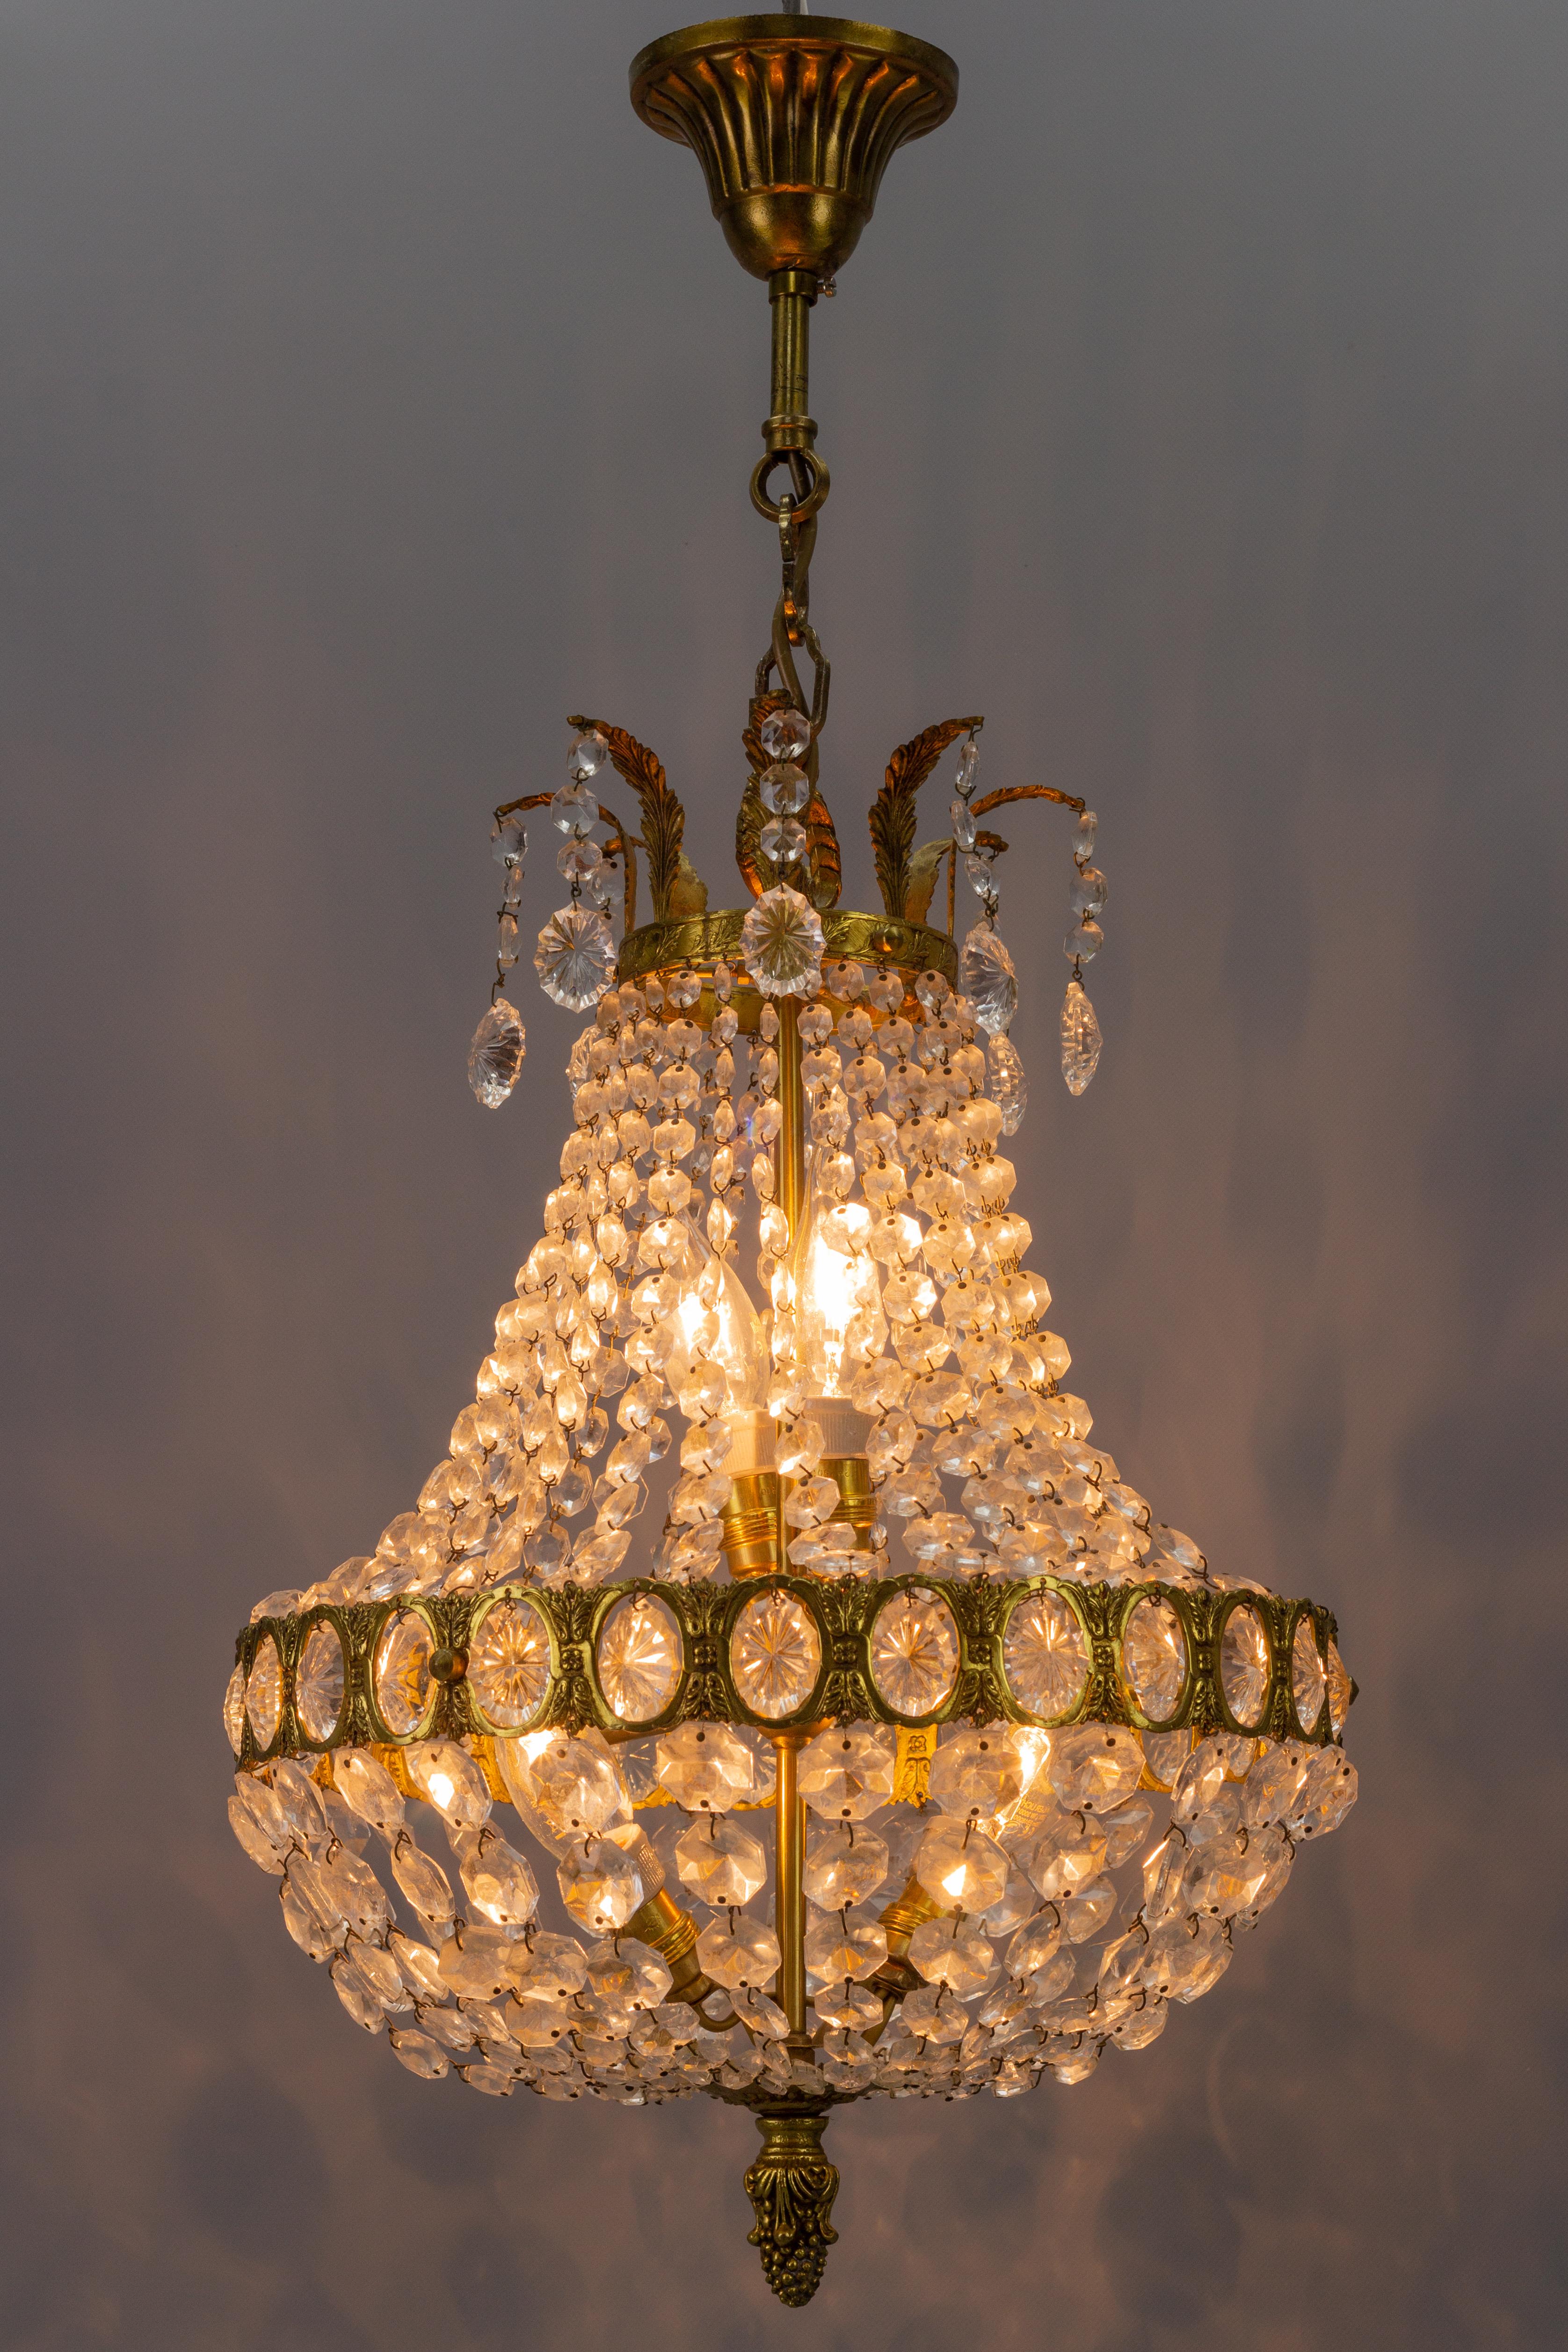 Mid-20th Century French Empire Style Crystal Glass and Four-Light Basket-Shaped Chandelier For Sale